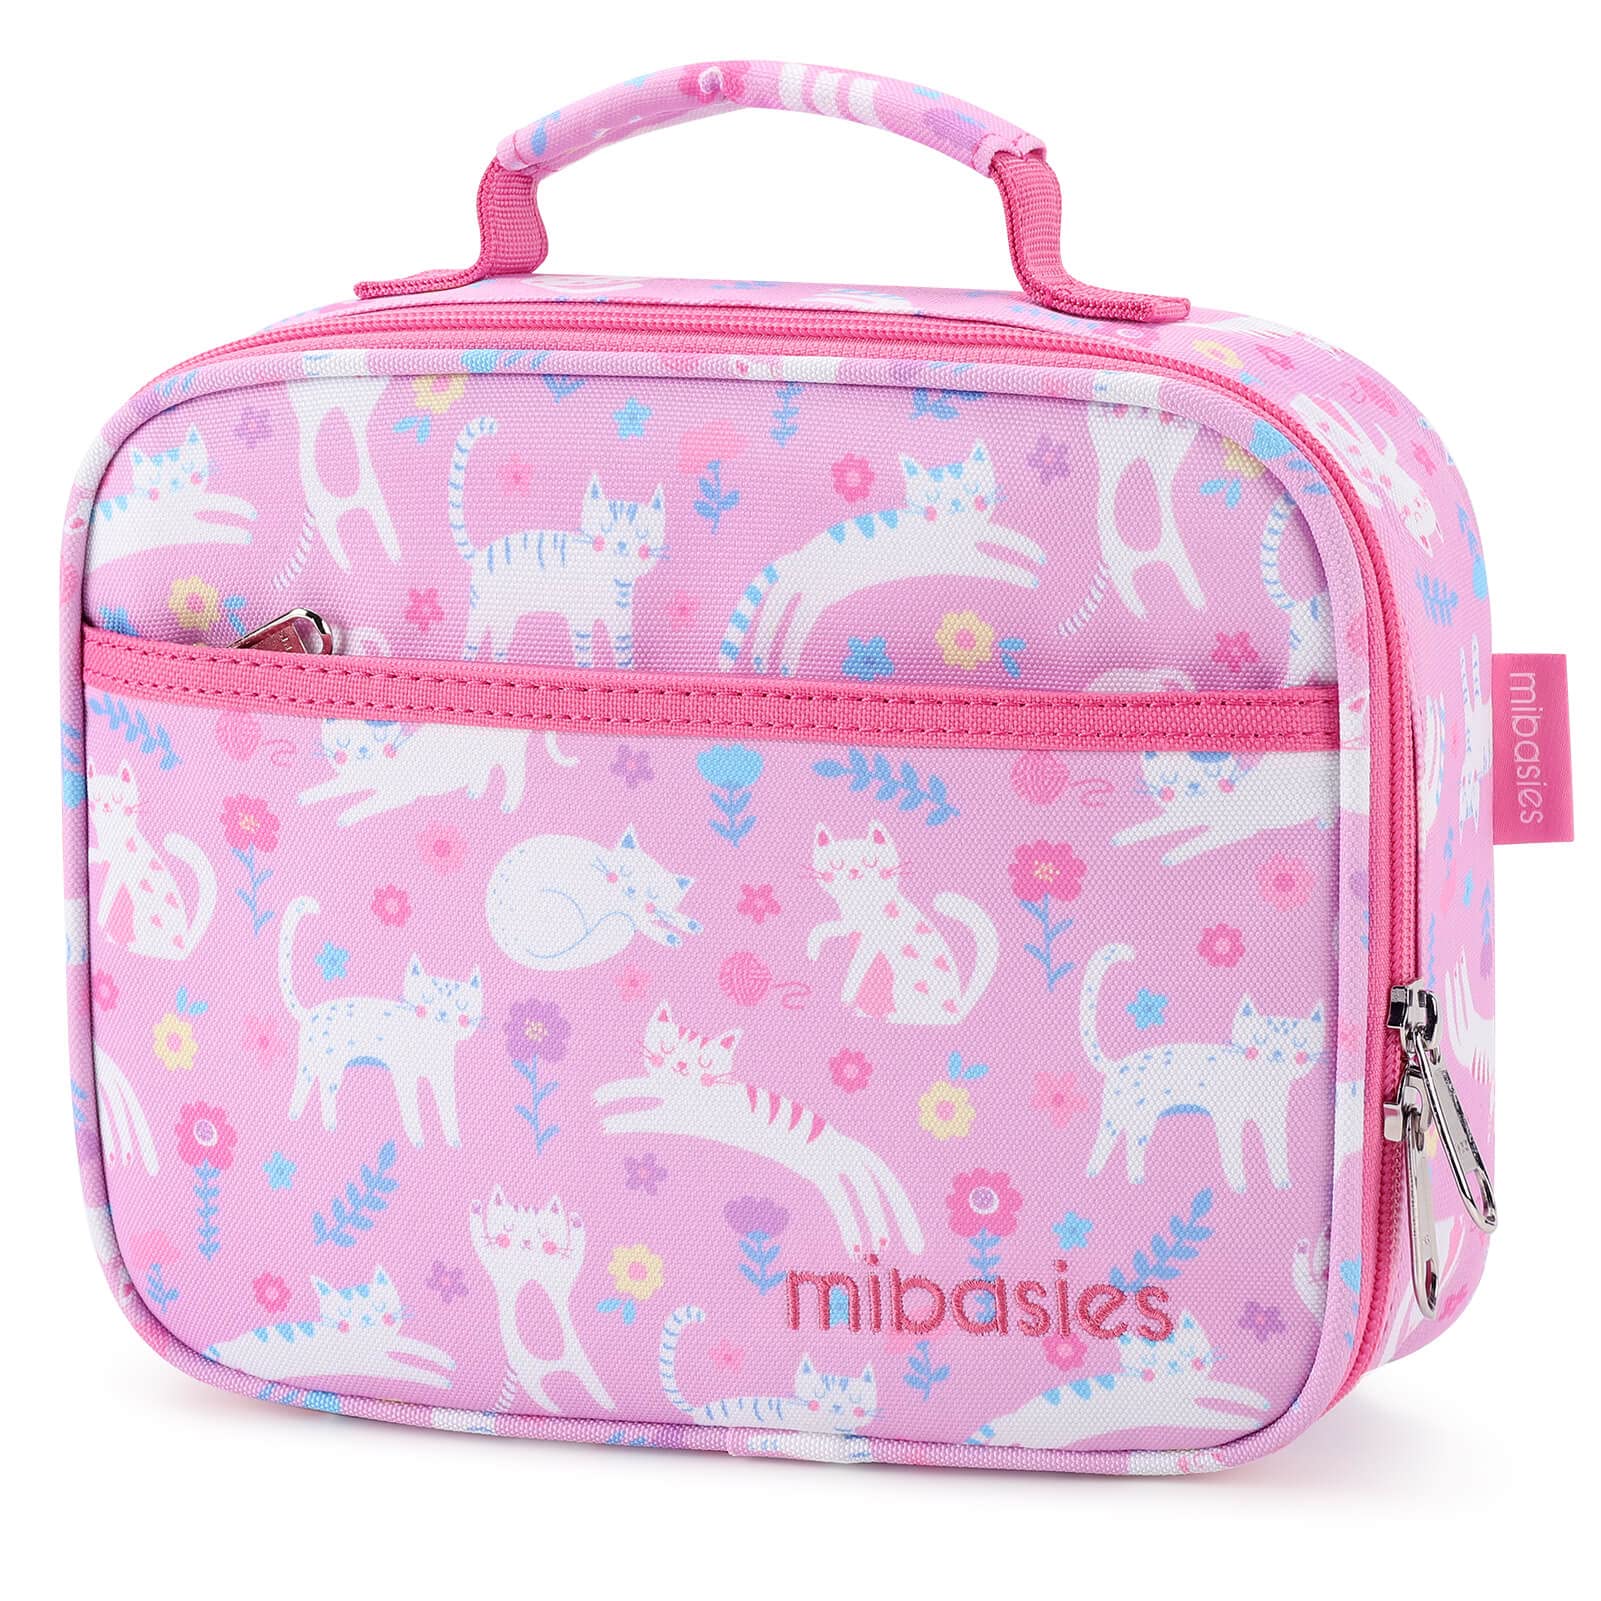 mibasies Unicorn Lunch Bag Kids Insulated Lunch Box for Girls with Water  Bottle Holder and Shoulder Strap (Mermaid Blue Purple)